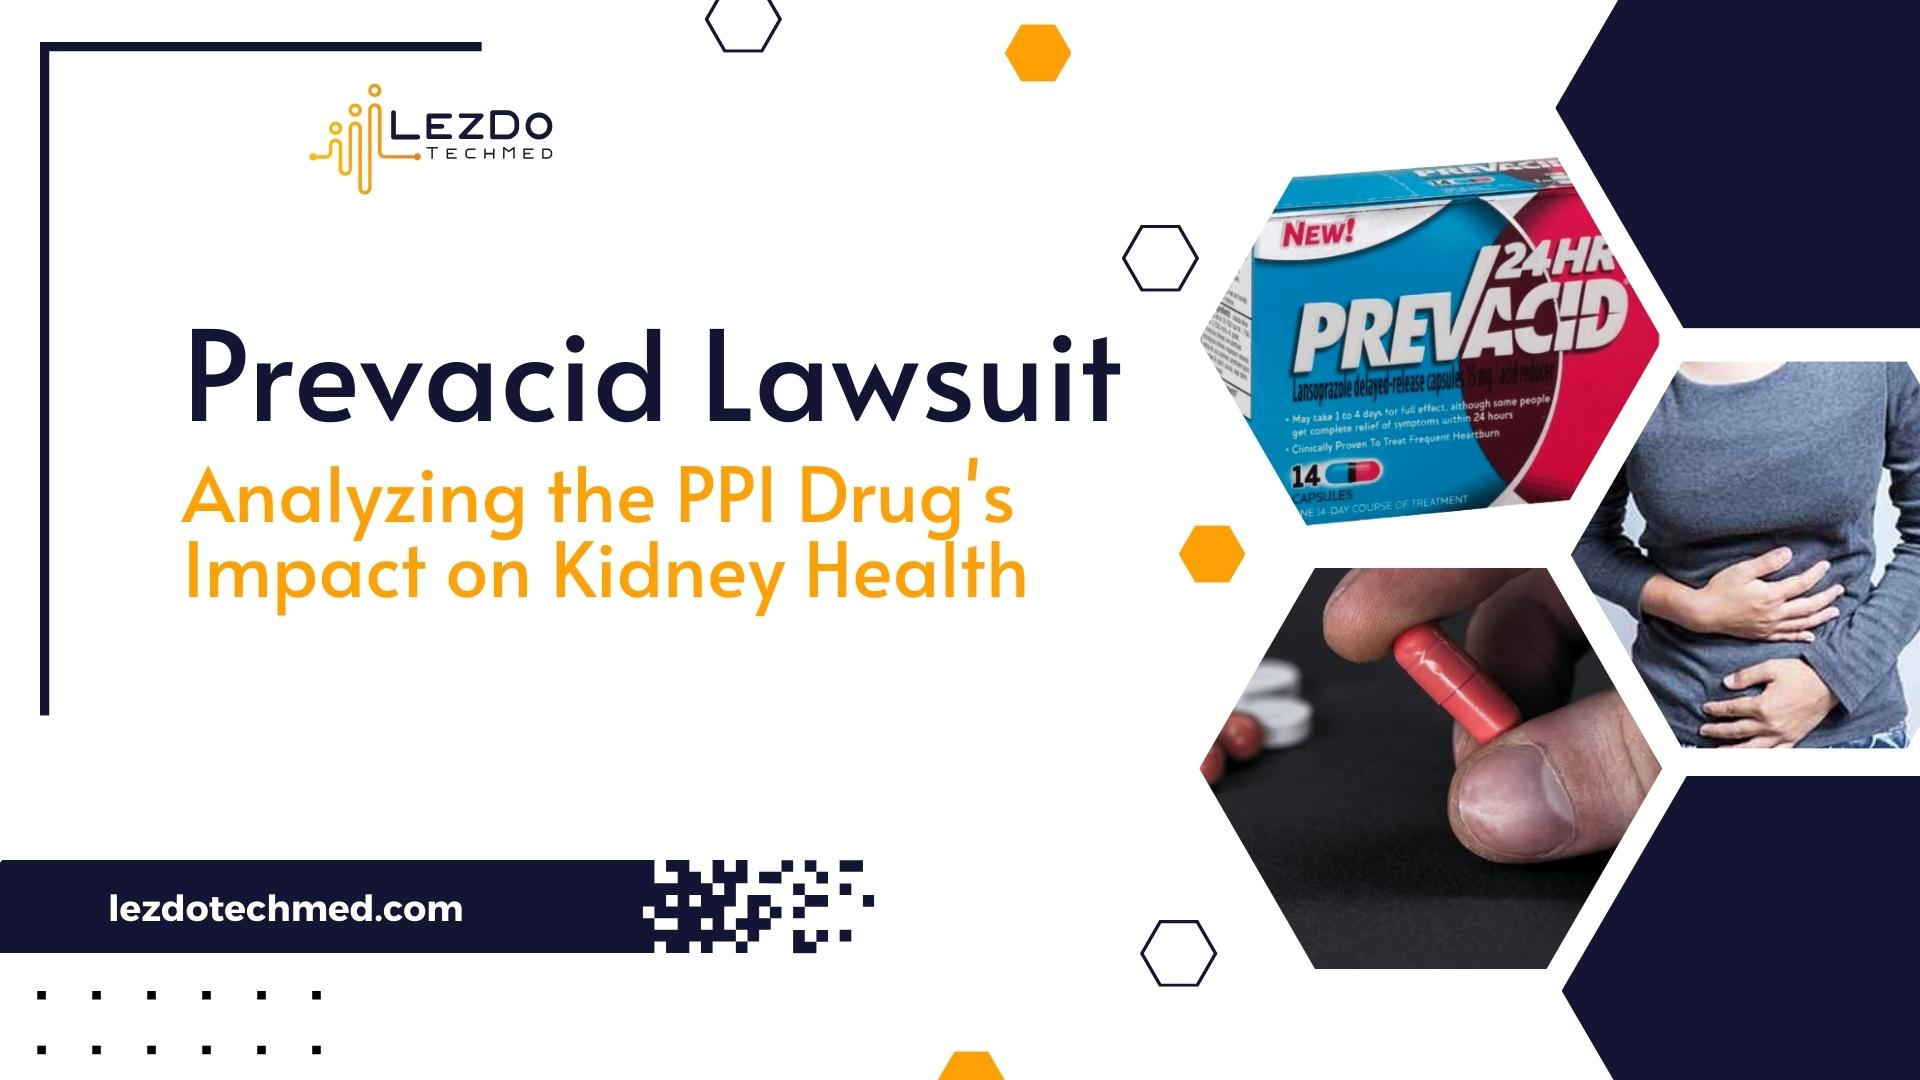 Prevacid Lawsuit: Analyzing the PPI Drug's Impact on Kidney Health